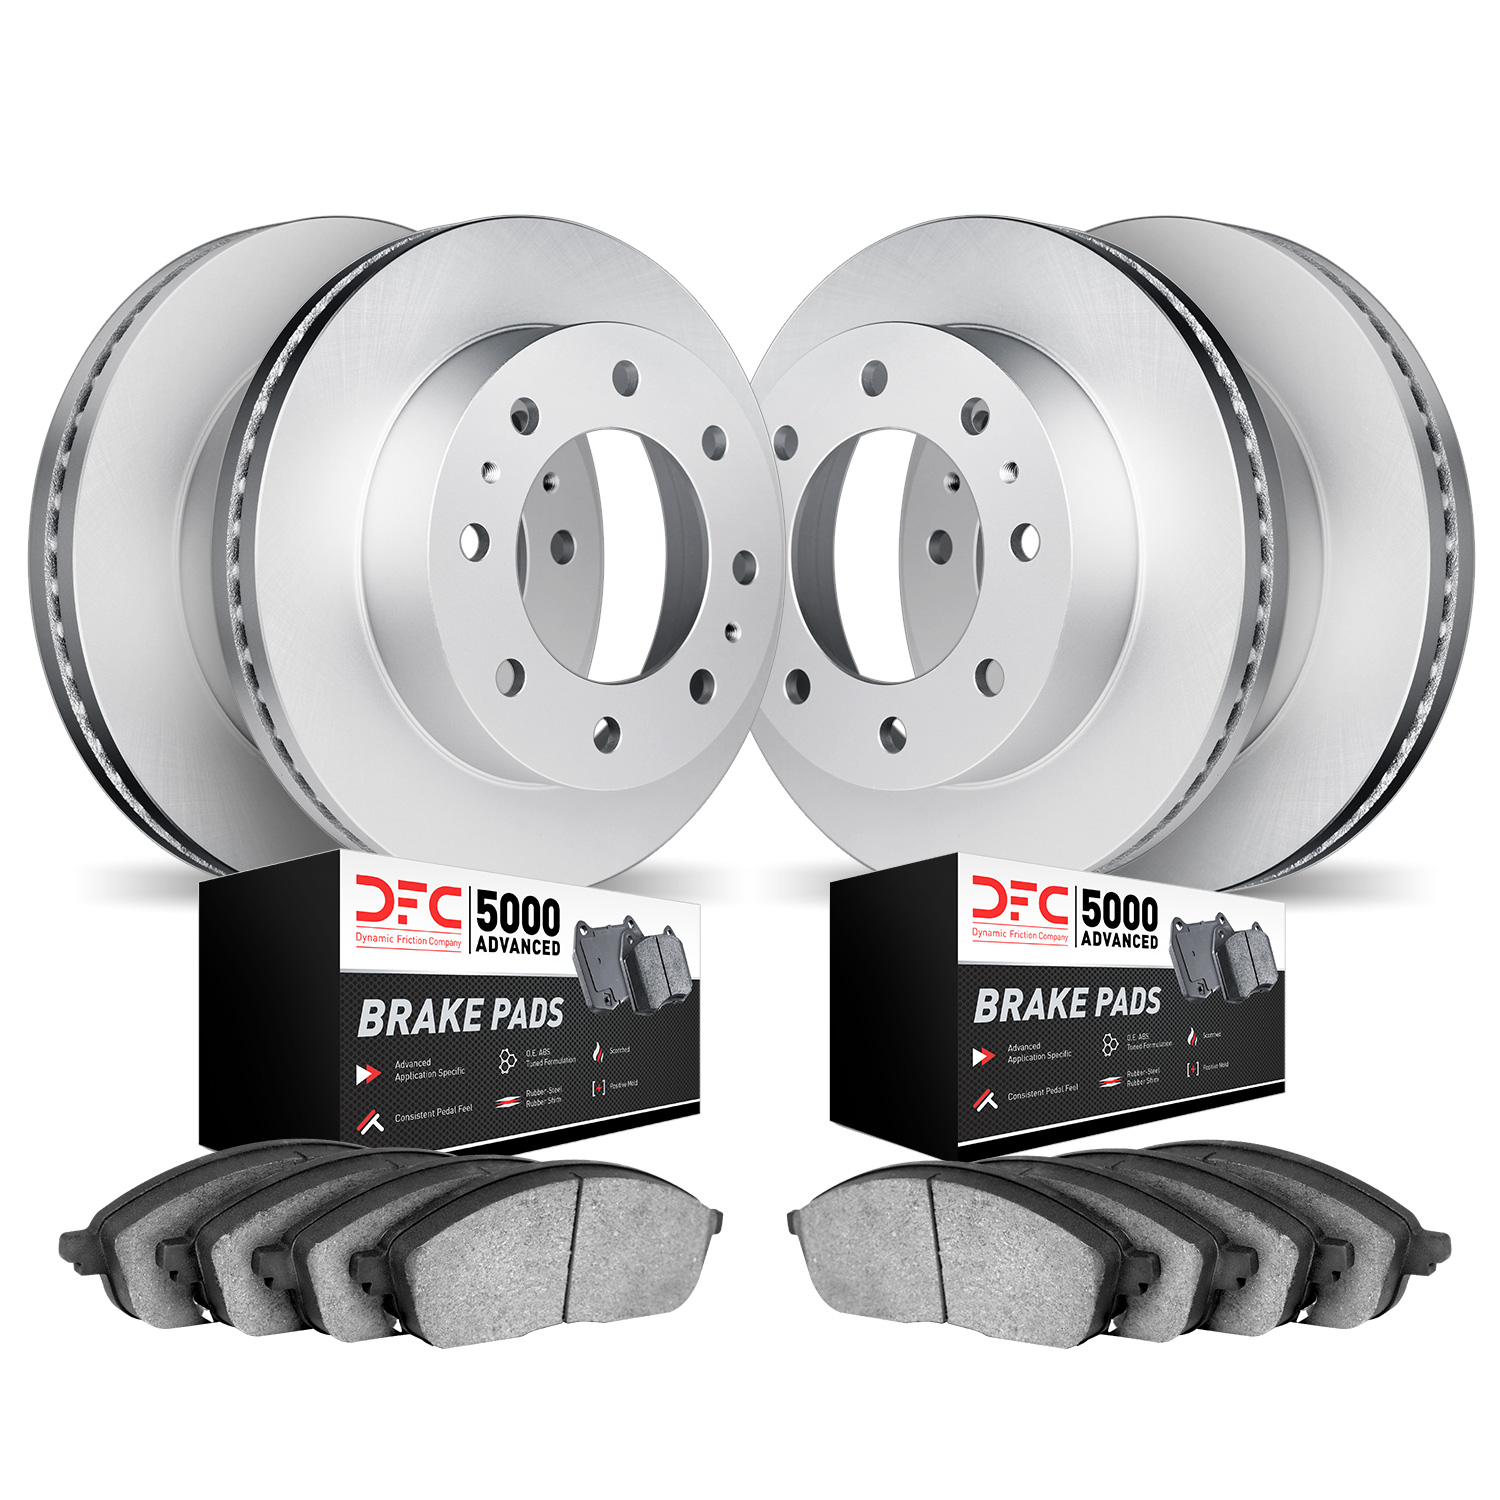 4504-54069 Geospec Brake Rotors w/5000 Advanced Brake Pads Kit, 2010-2012 Ford/Lincoln/Mercury/Mazda, Position: Front and Rear